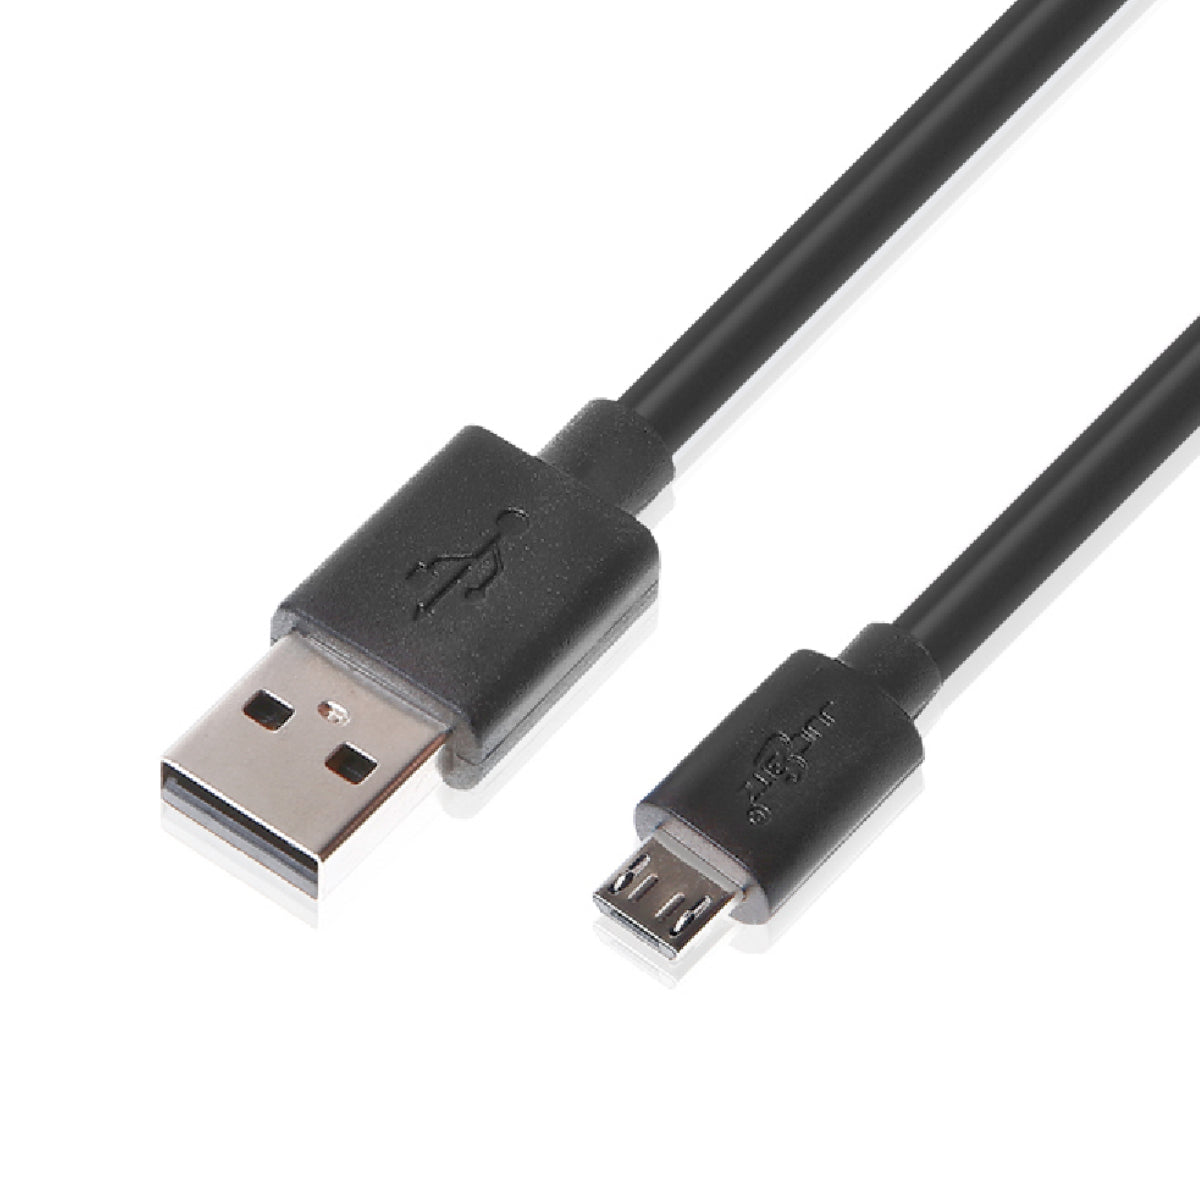 USB 2.0 to Micro-USB Fast Charger Cable High Speed Data Transfer Lead - Black